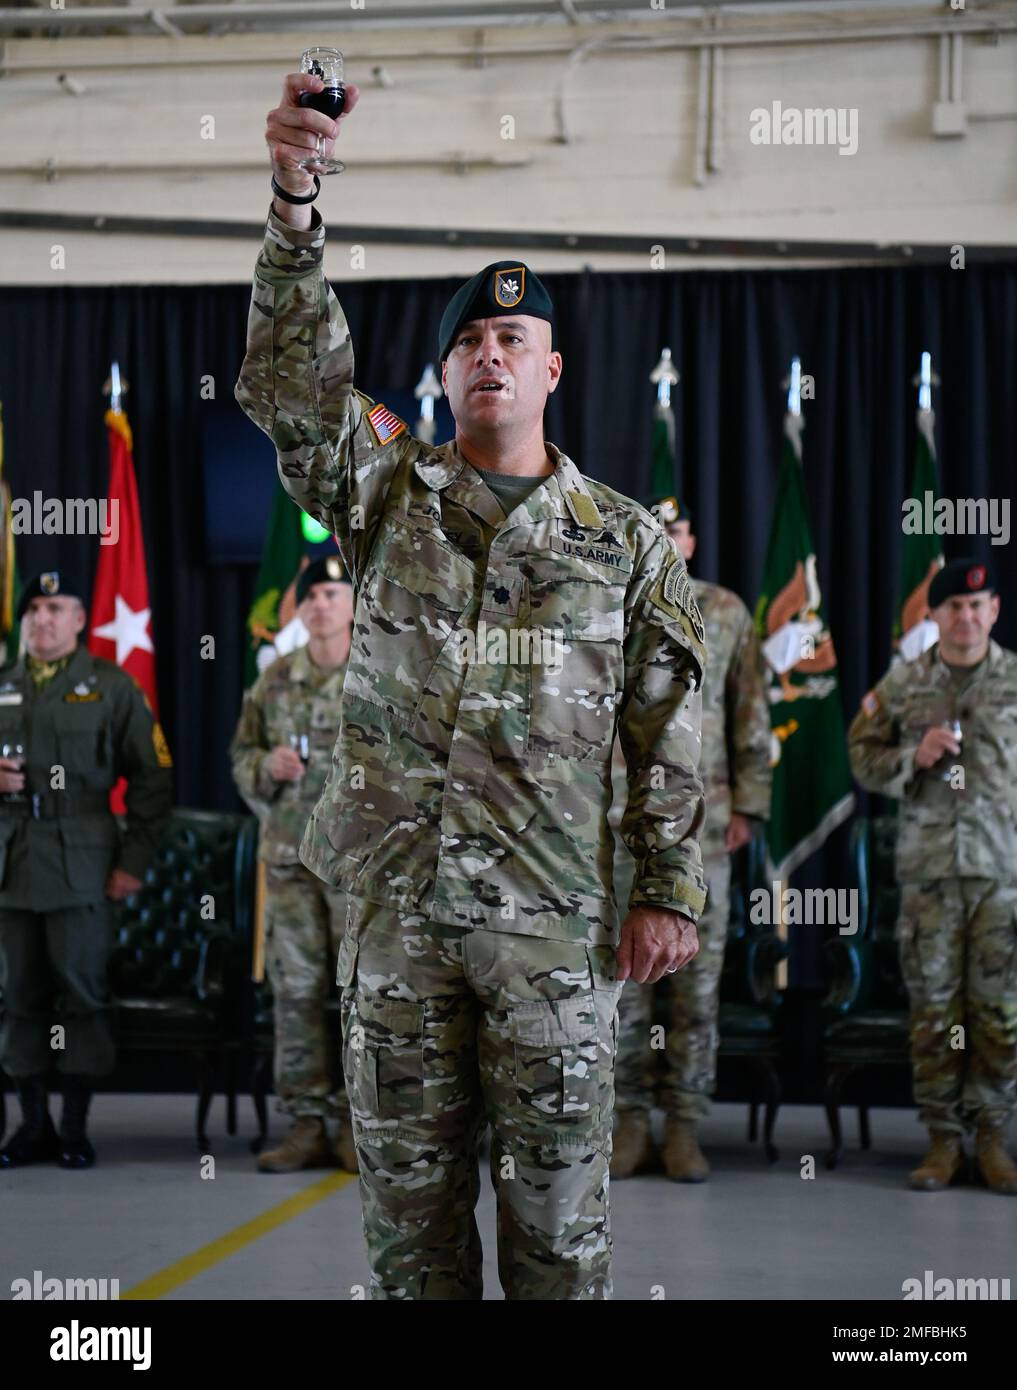 Lieutenant Colonel Patrick Toohey, commander, 4th Battalion, 1st Special Warfare Training Group (Airborne) toasts the Special Forces Regiment during a graduation ceremony at Fort Bragg, North Carolina August 18, 2022. The ceremony marked the completion of the Special Forces Qualification Course where Soldiers earned the honor of wearing the green beret, the official headgear of Special Forces. Stock Photo